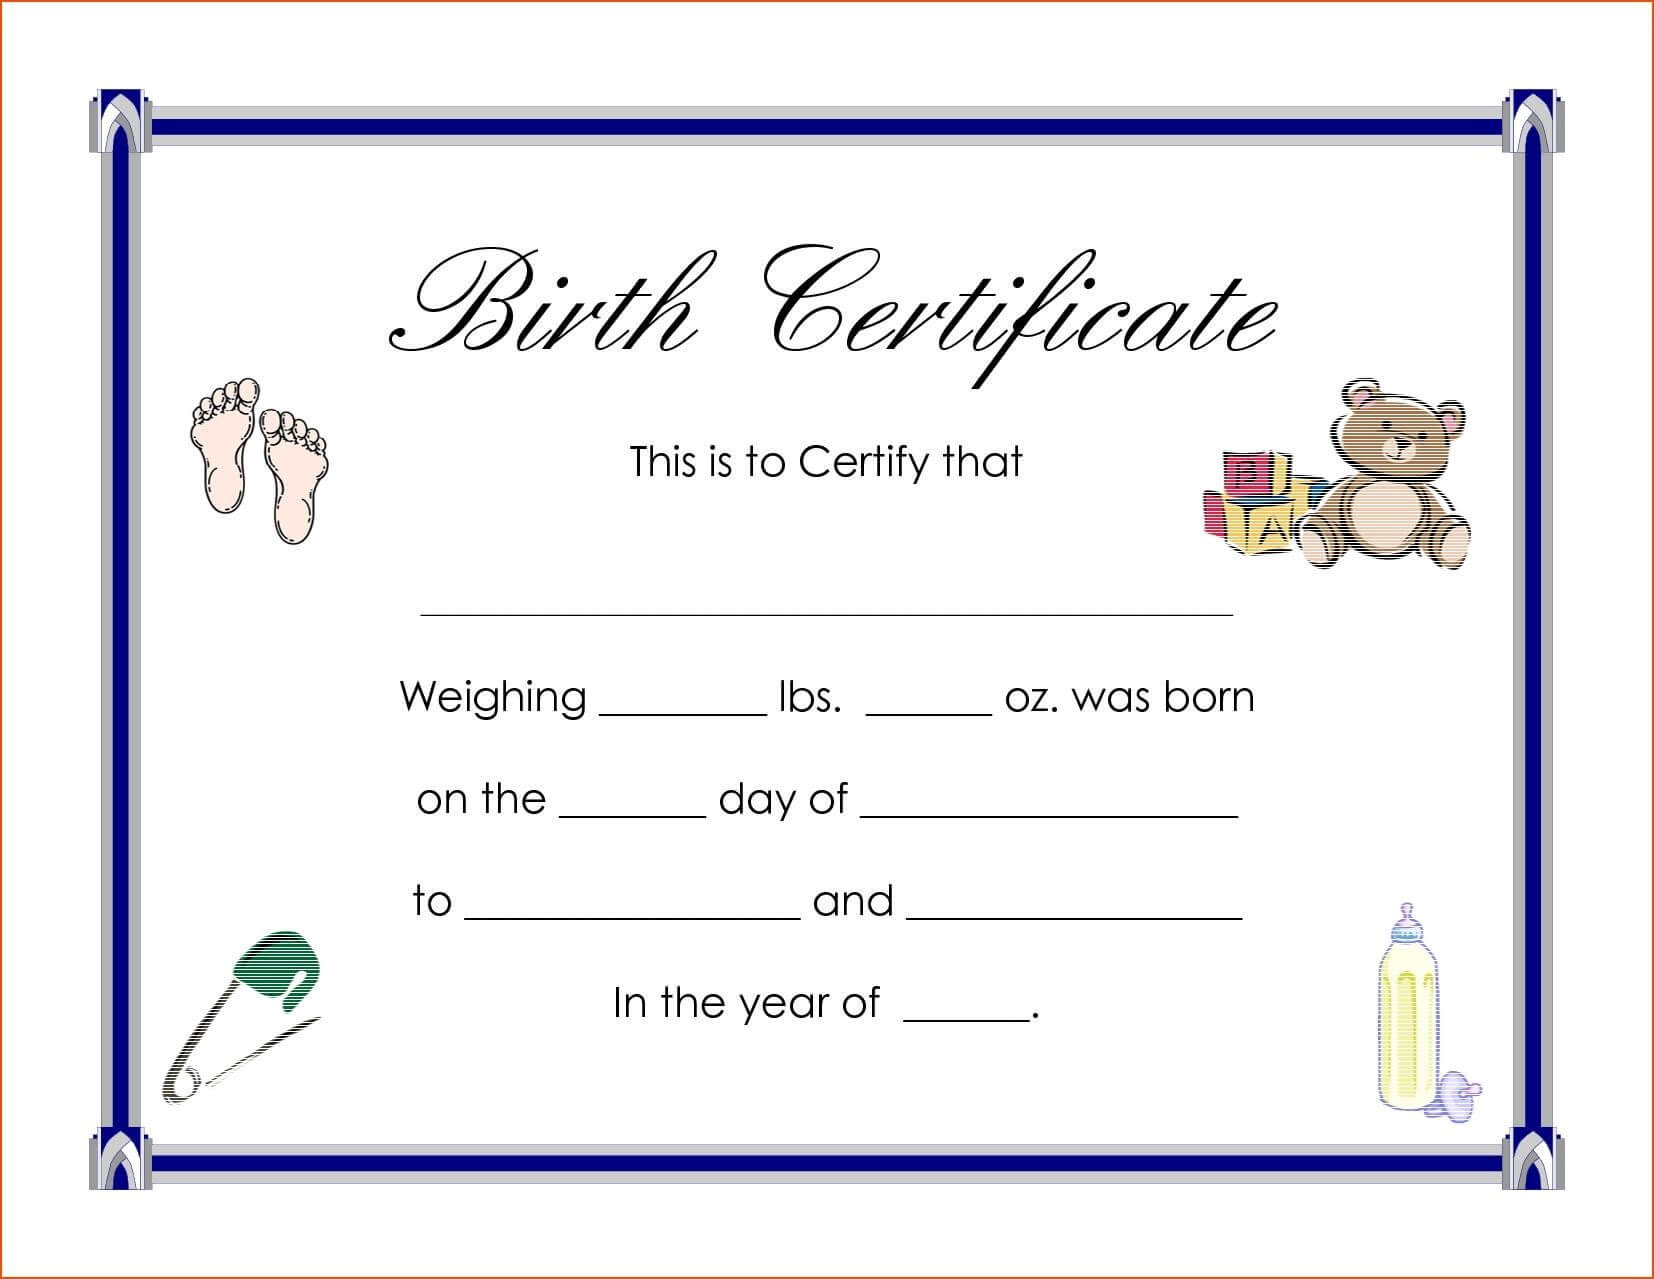 Certificates. Enchanting Birth Certificate Templates Designs Pertaining To Birth Certificate Fake Template